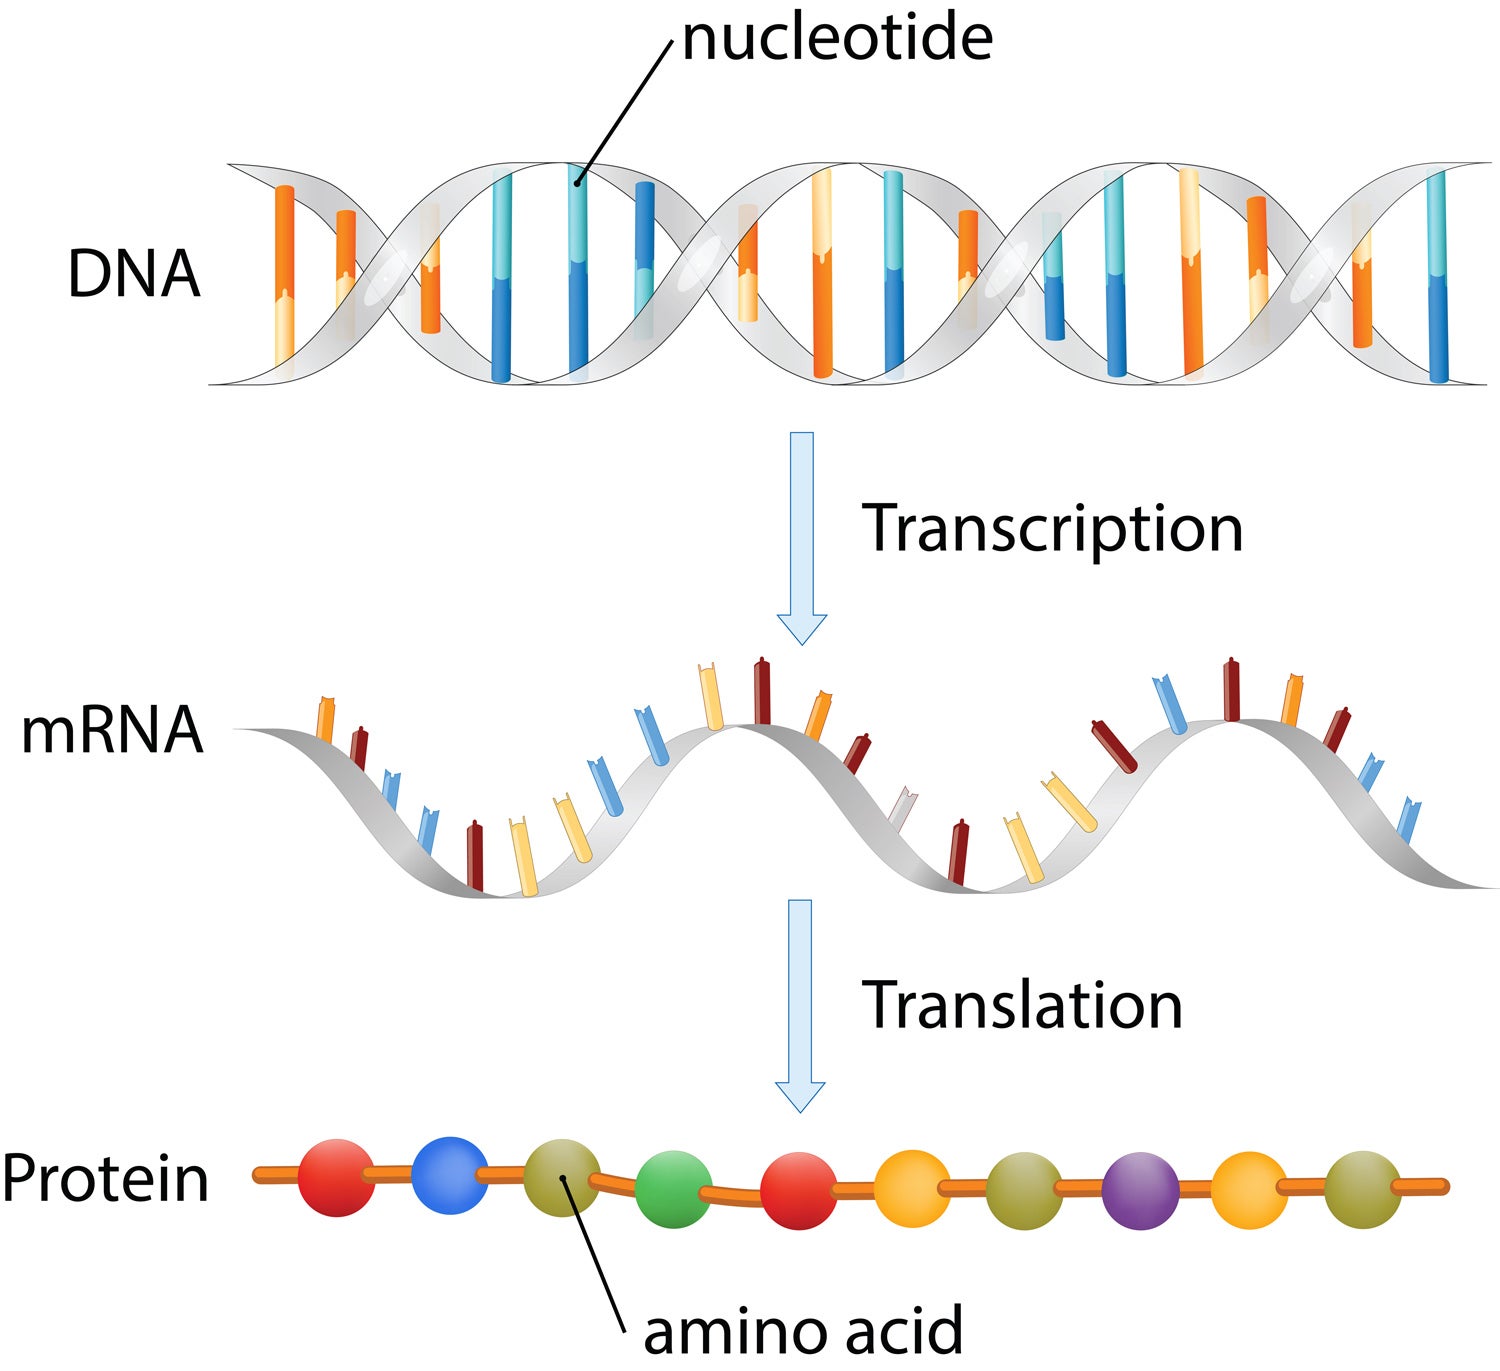 image depicting DNA transcription to mRNA and mRNA translation to protein